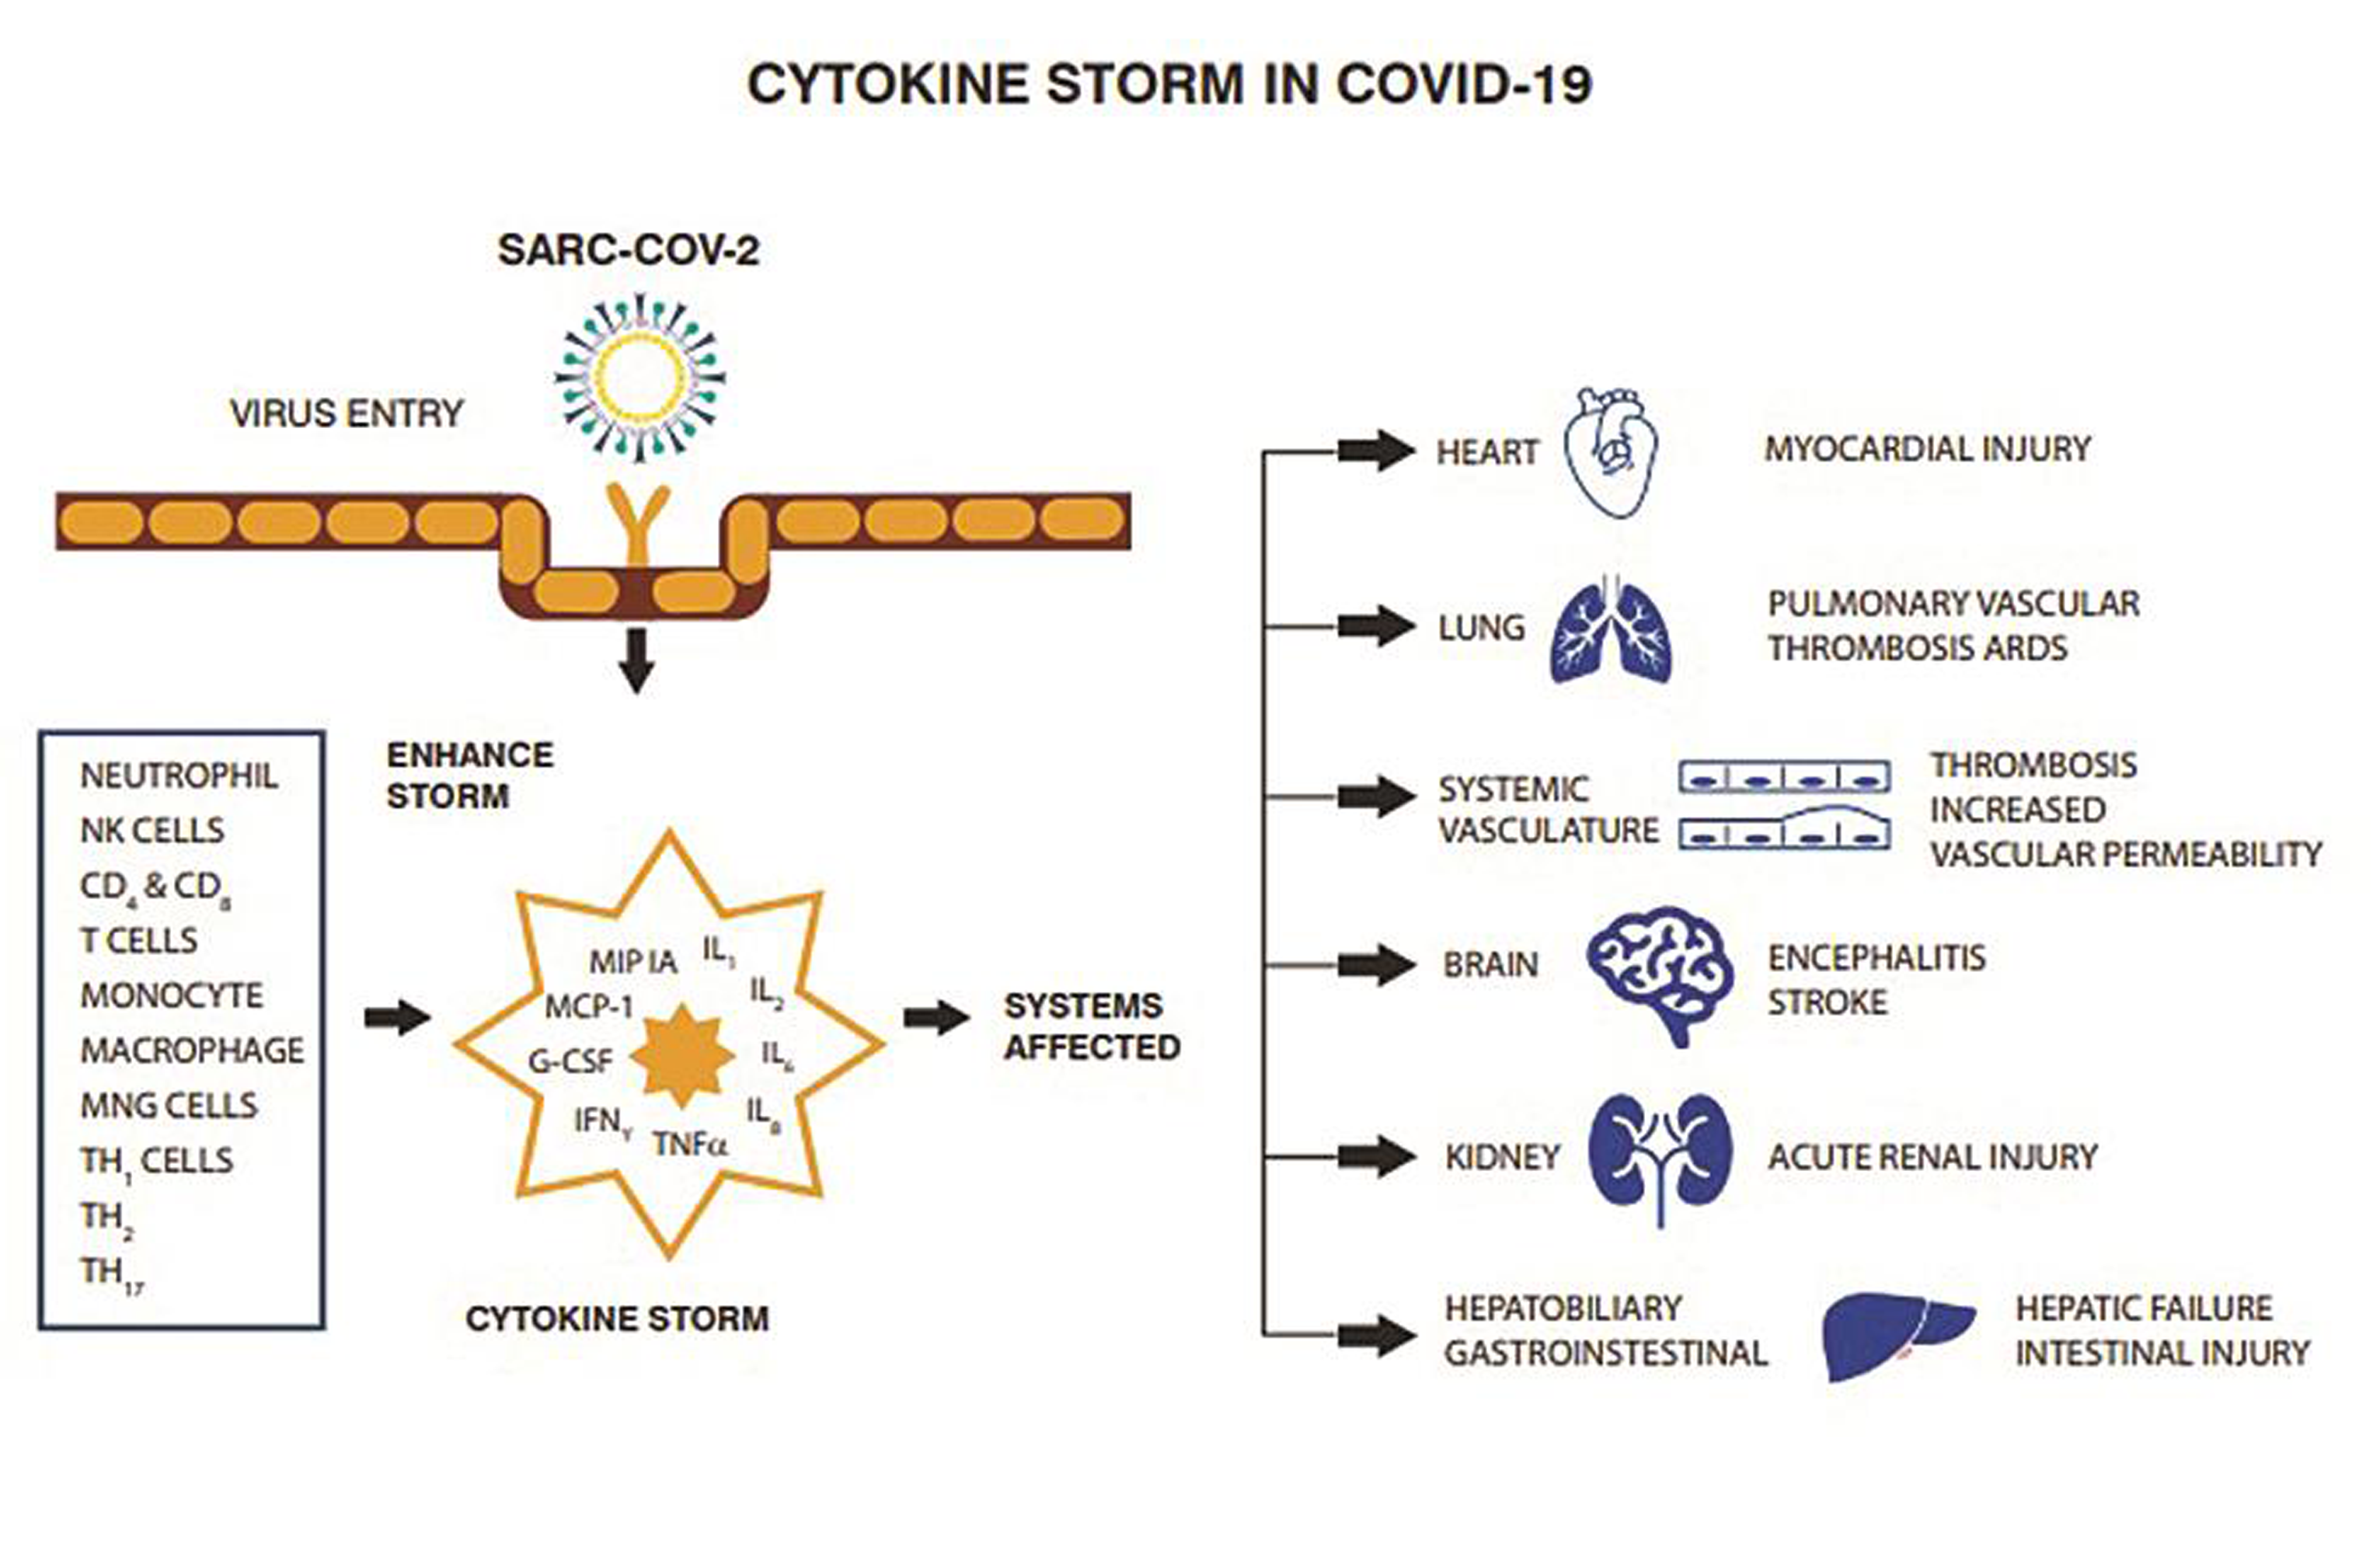 Cytokine storm may occur in infection with coronavirus characterized by multiorgan failure.